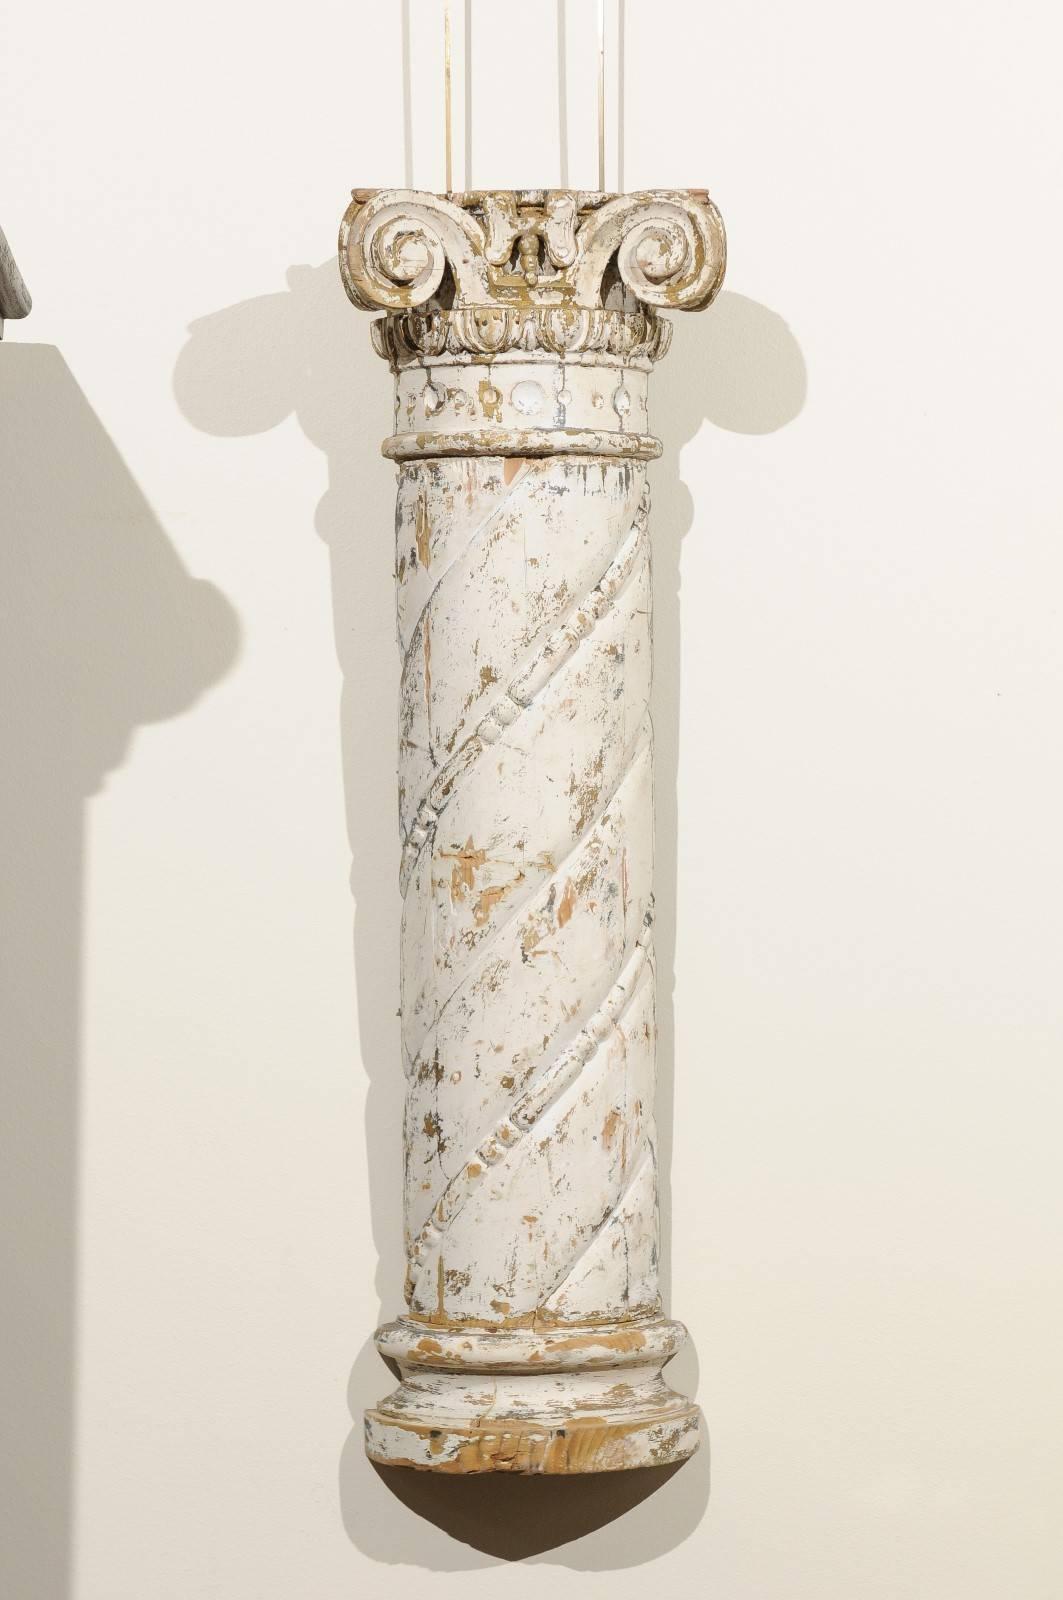 Pair of 18th century carved wood white columns, circa 1790
A pair of stylized Ionic columns that were originally mounted on a flat surface in the 18th century. Today they can add interest to your space when you use these architectural elements. The